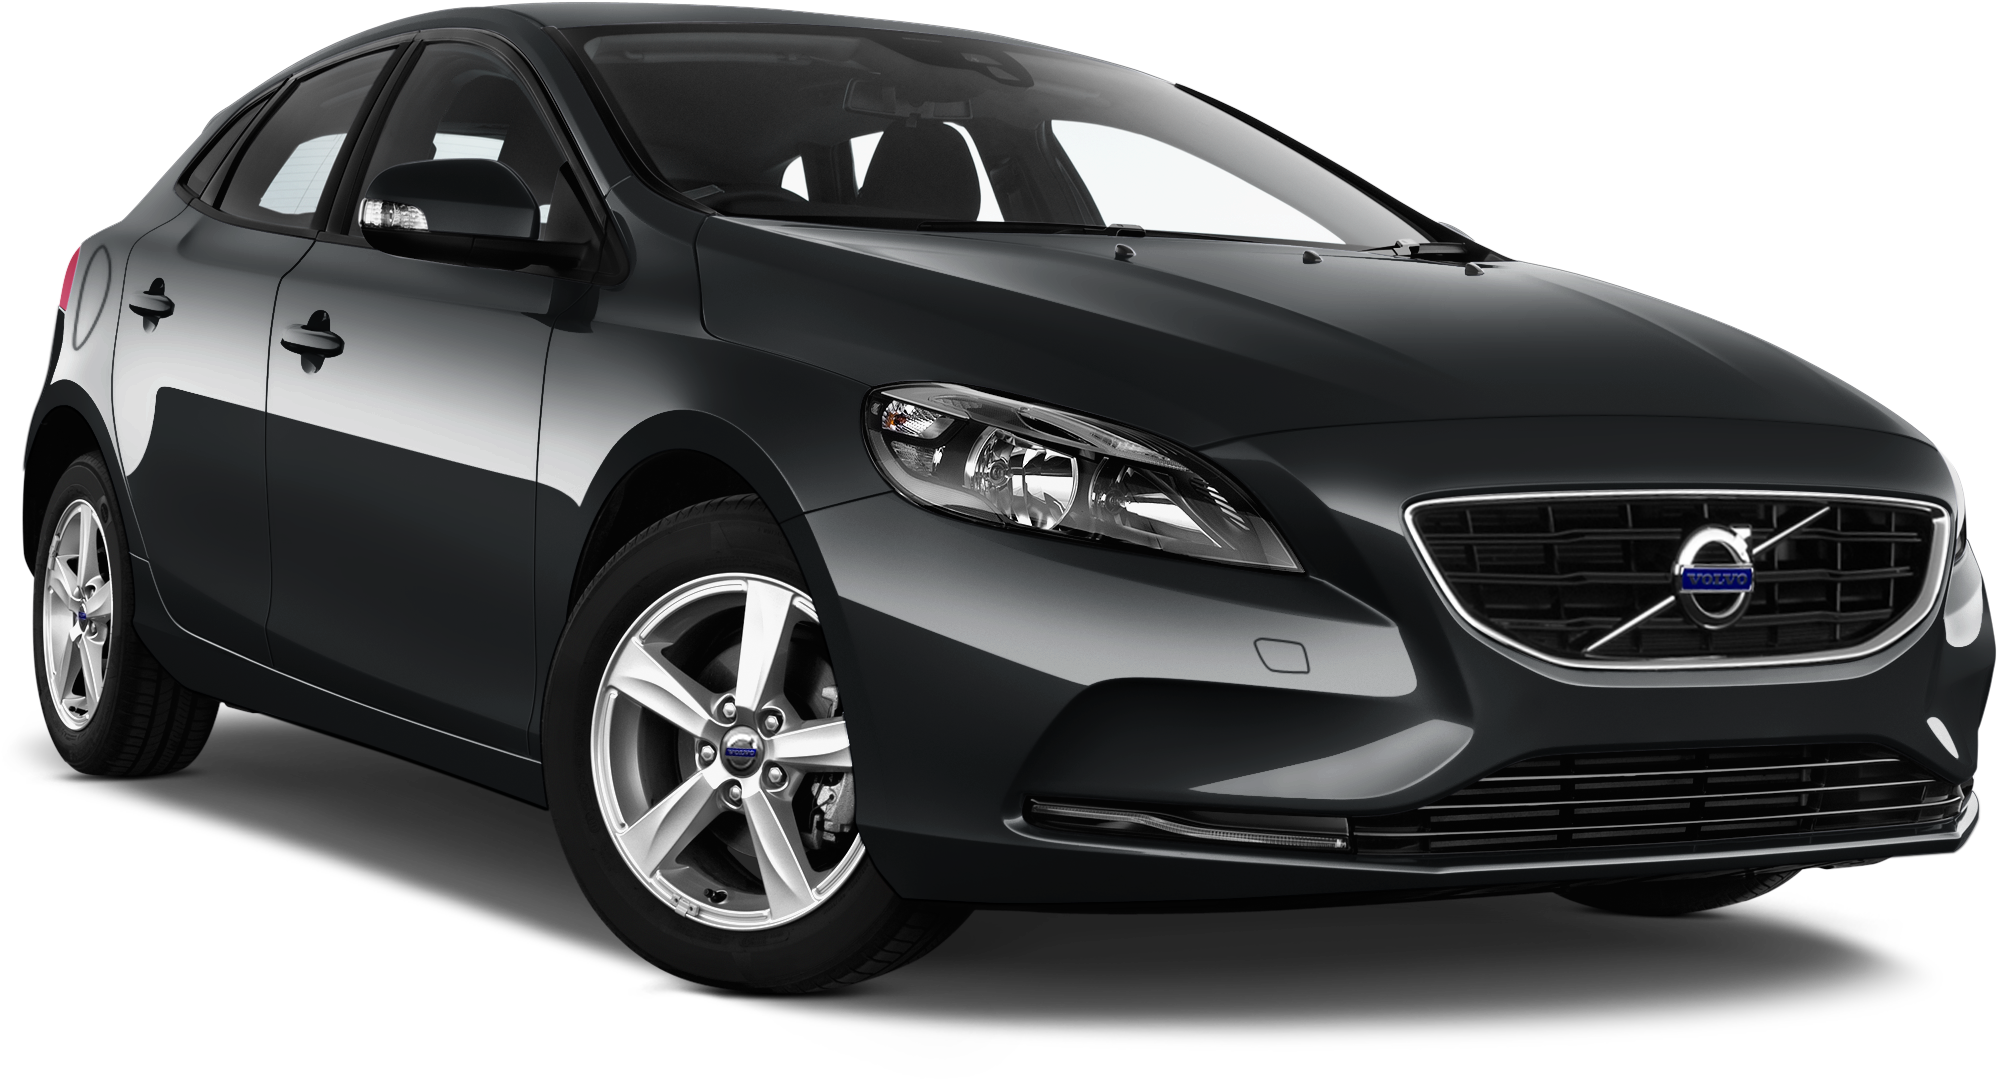 Volvo V40 Company Car Front View - Fgx Xr6 Turbo Ute 2016 (2048x1360), Png Download